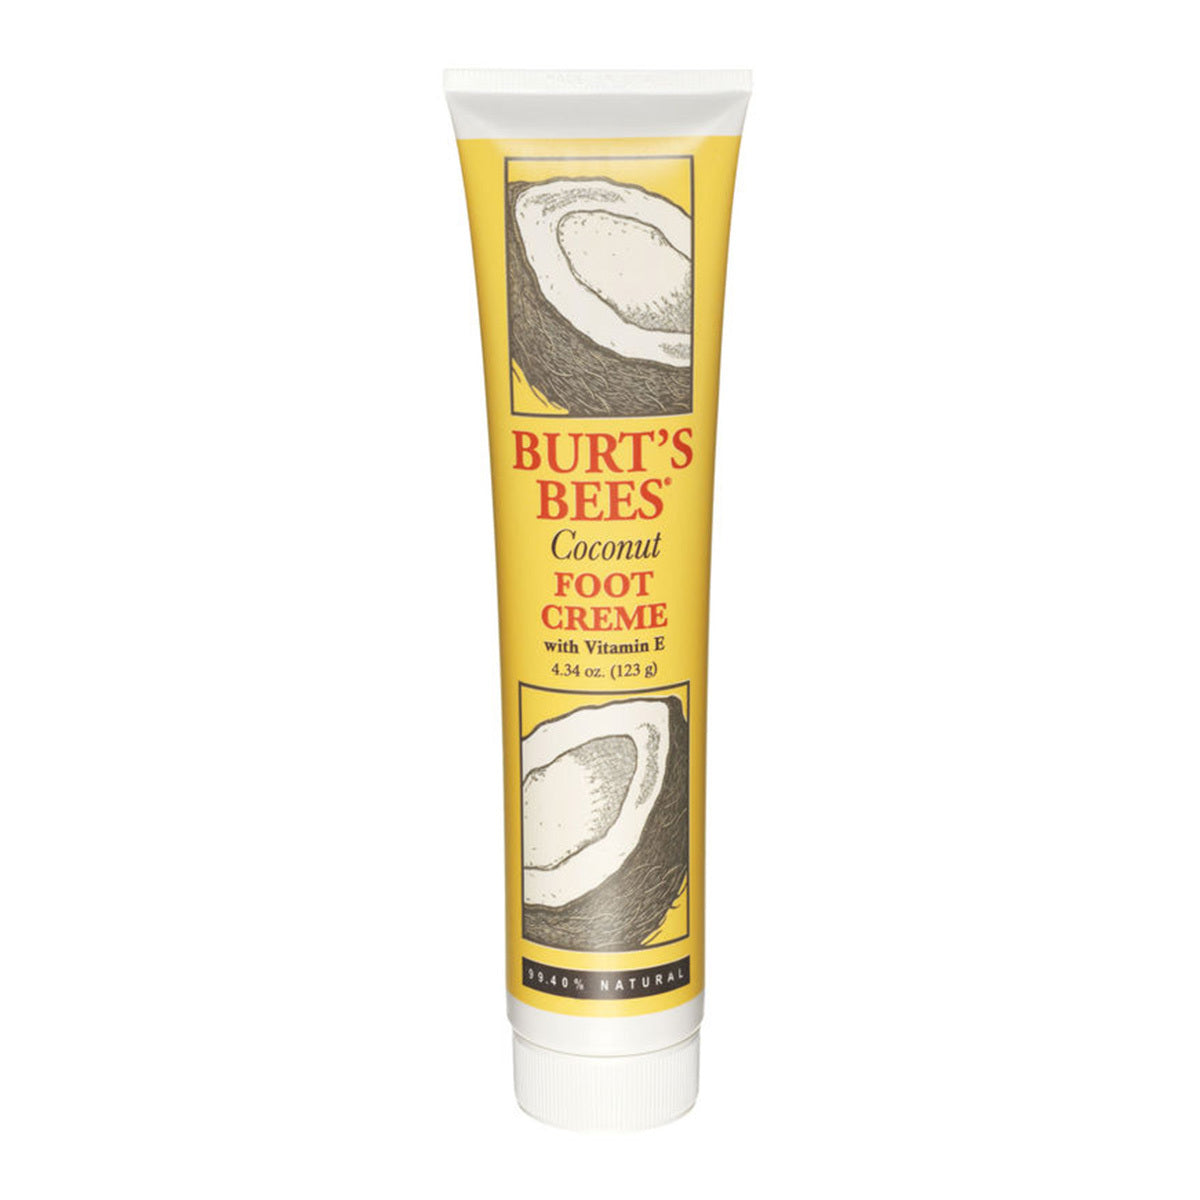 Primary image of Coconut Foot Creme